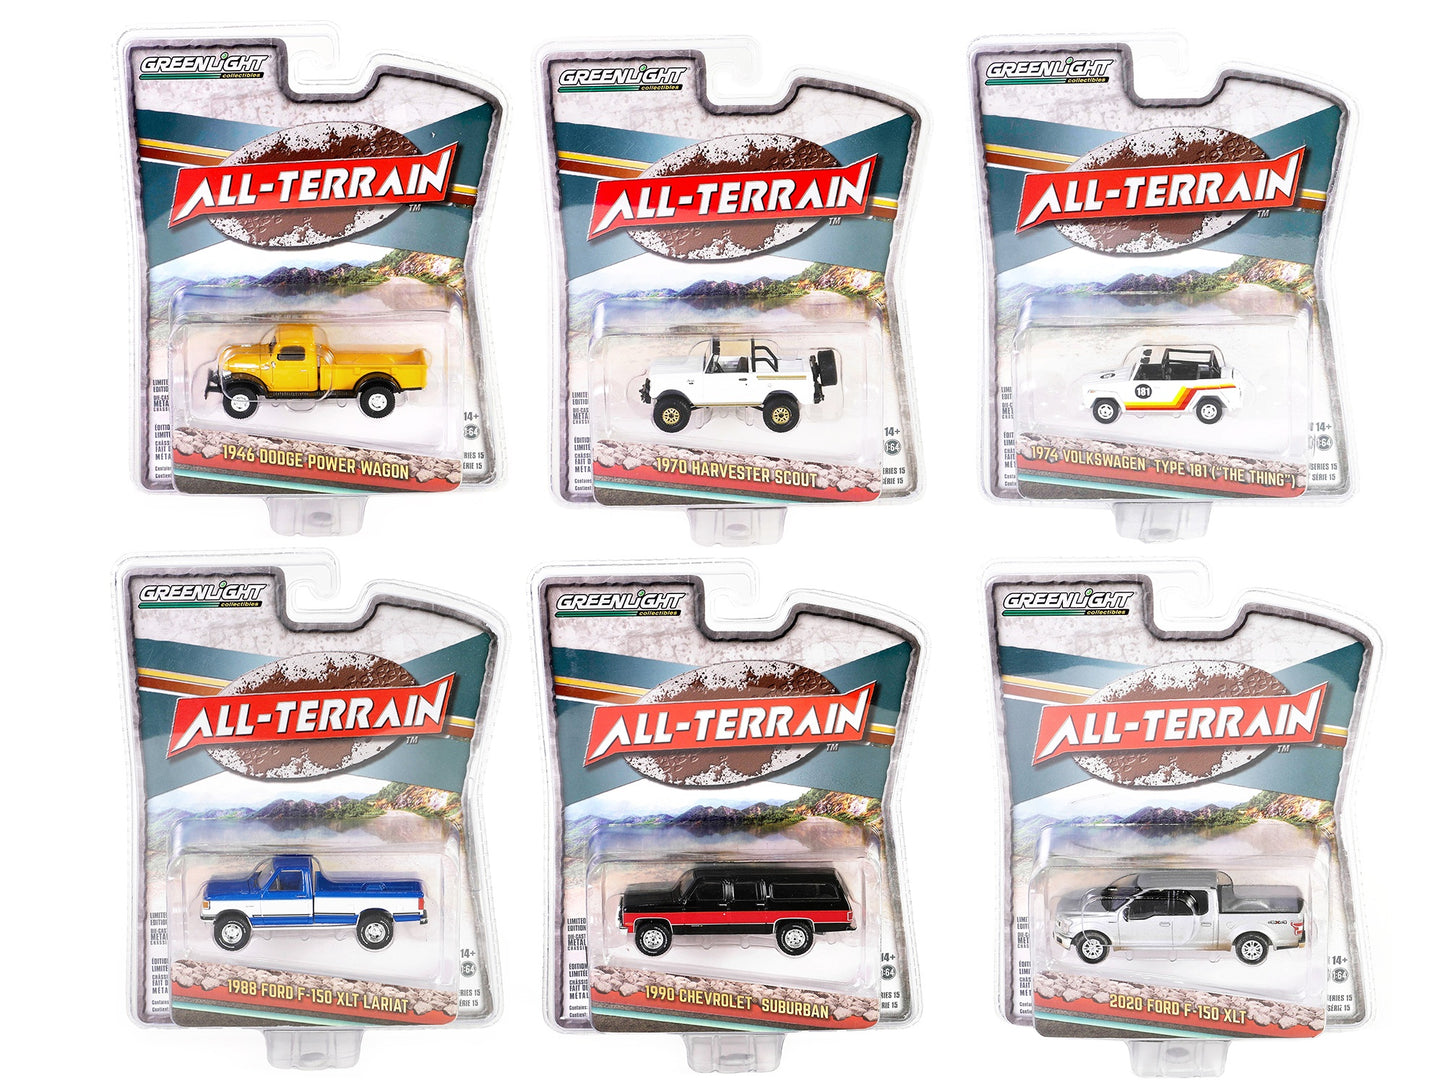 "All Terrain" Series 15 Set of 6 pieces 1/64 Diecast Model Cars by Greenlight